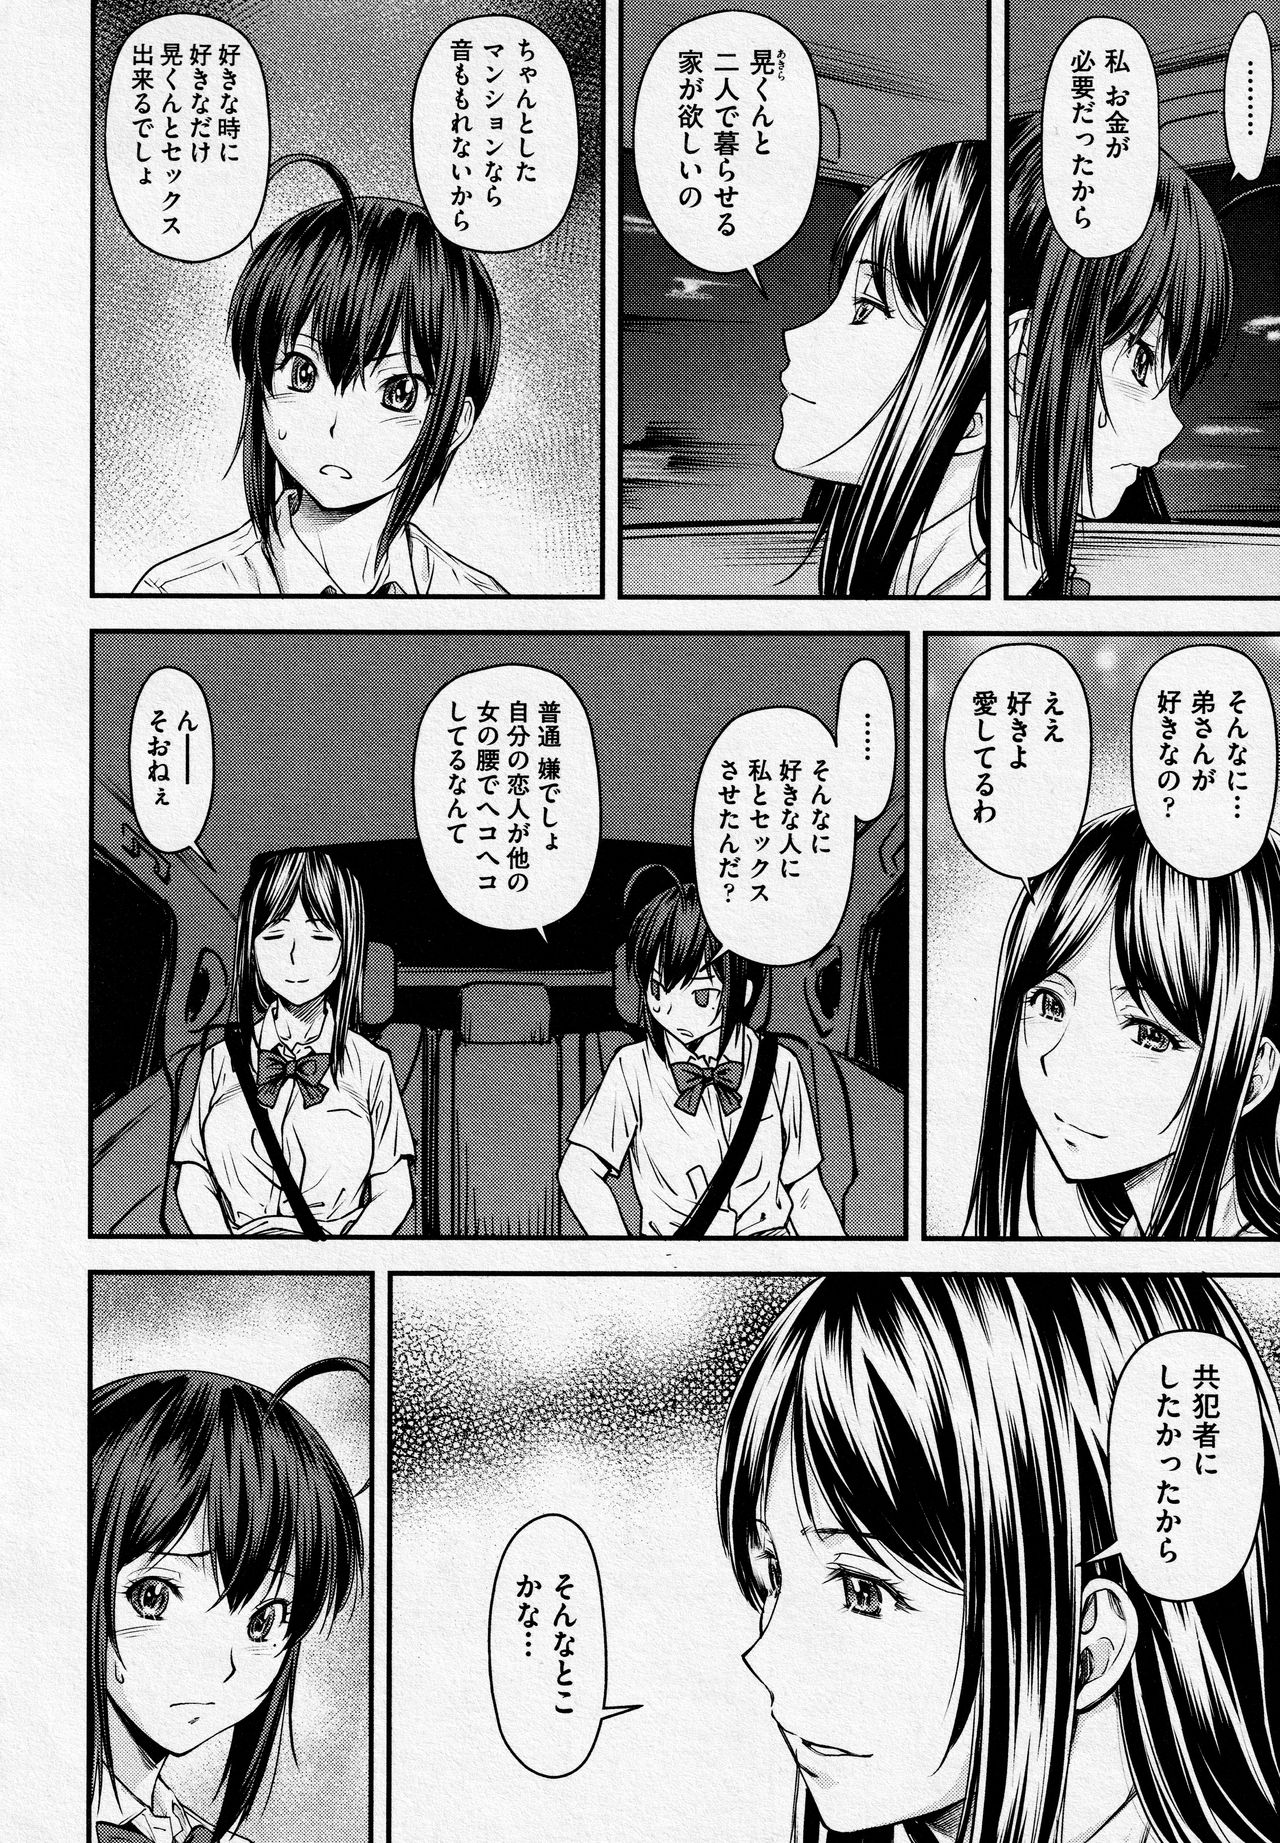 Kaname Date #14 - Page 2 - HentaiEra